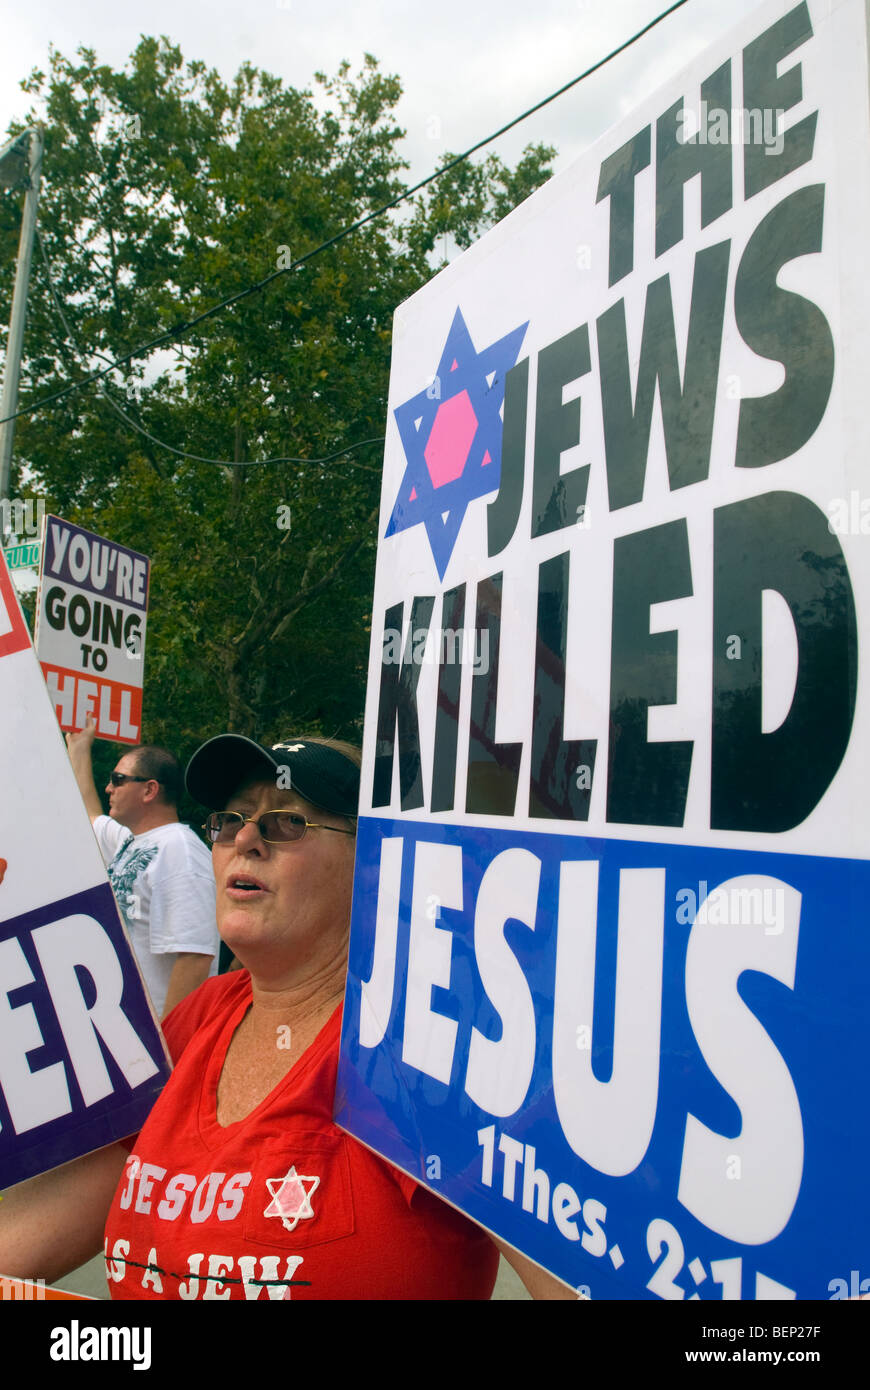 Members of the Westboro Baptist Church protest in front of Brooklyn Technical High School in New York Stock Photo